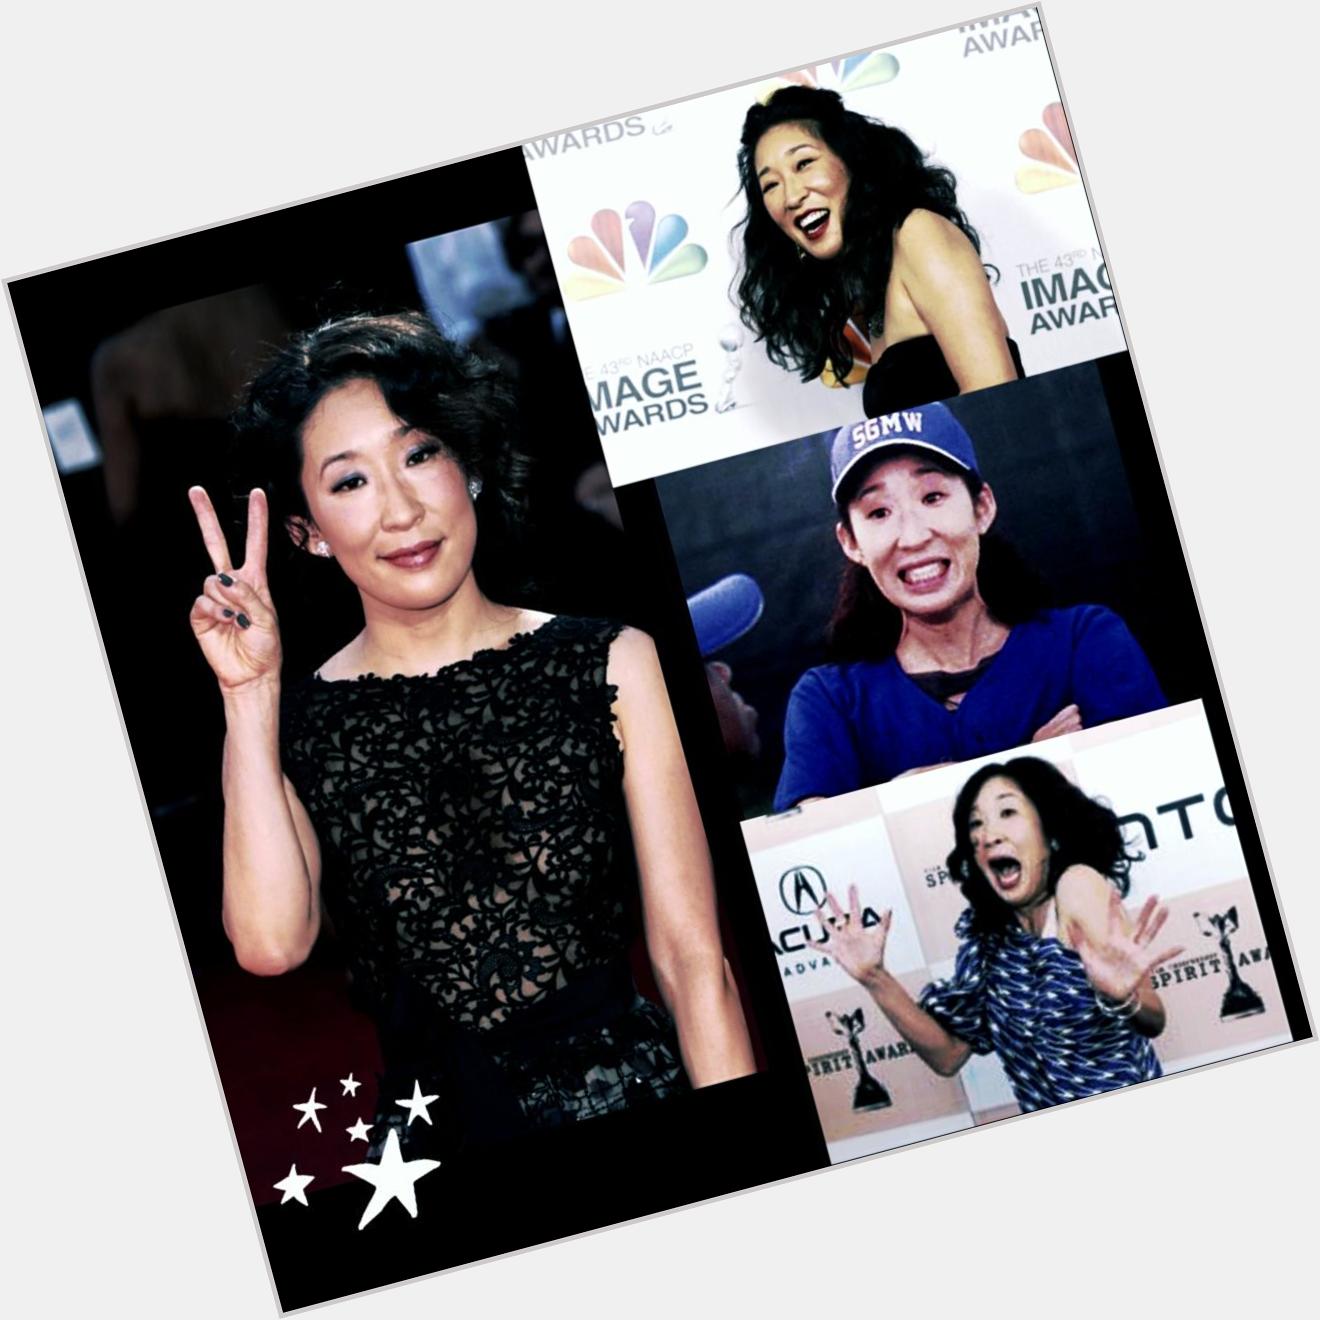 A very happy birthday to the beloved Sandra Oh. Thank you for continuing to inspire me.  